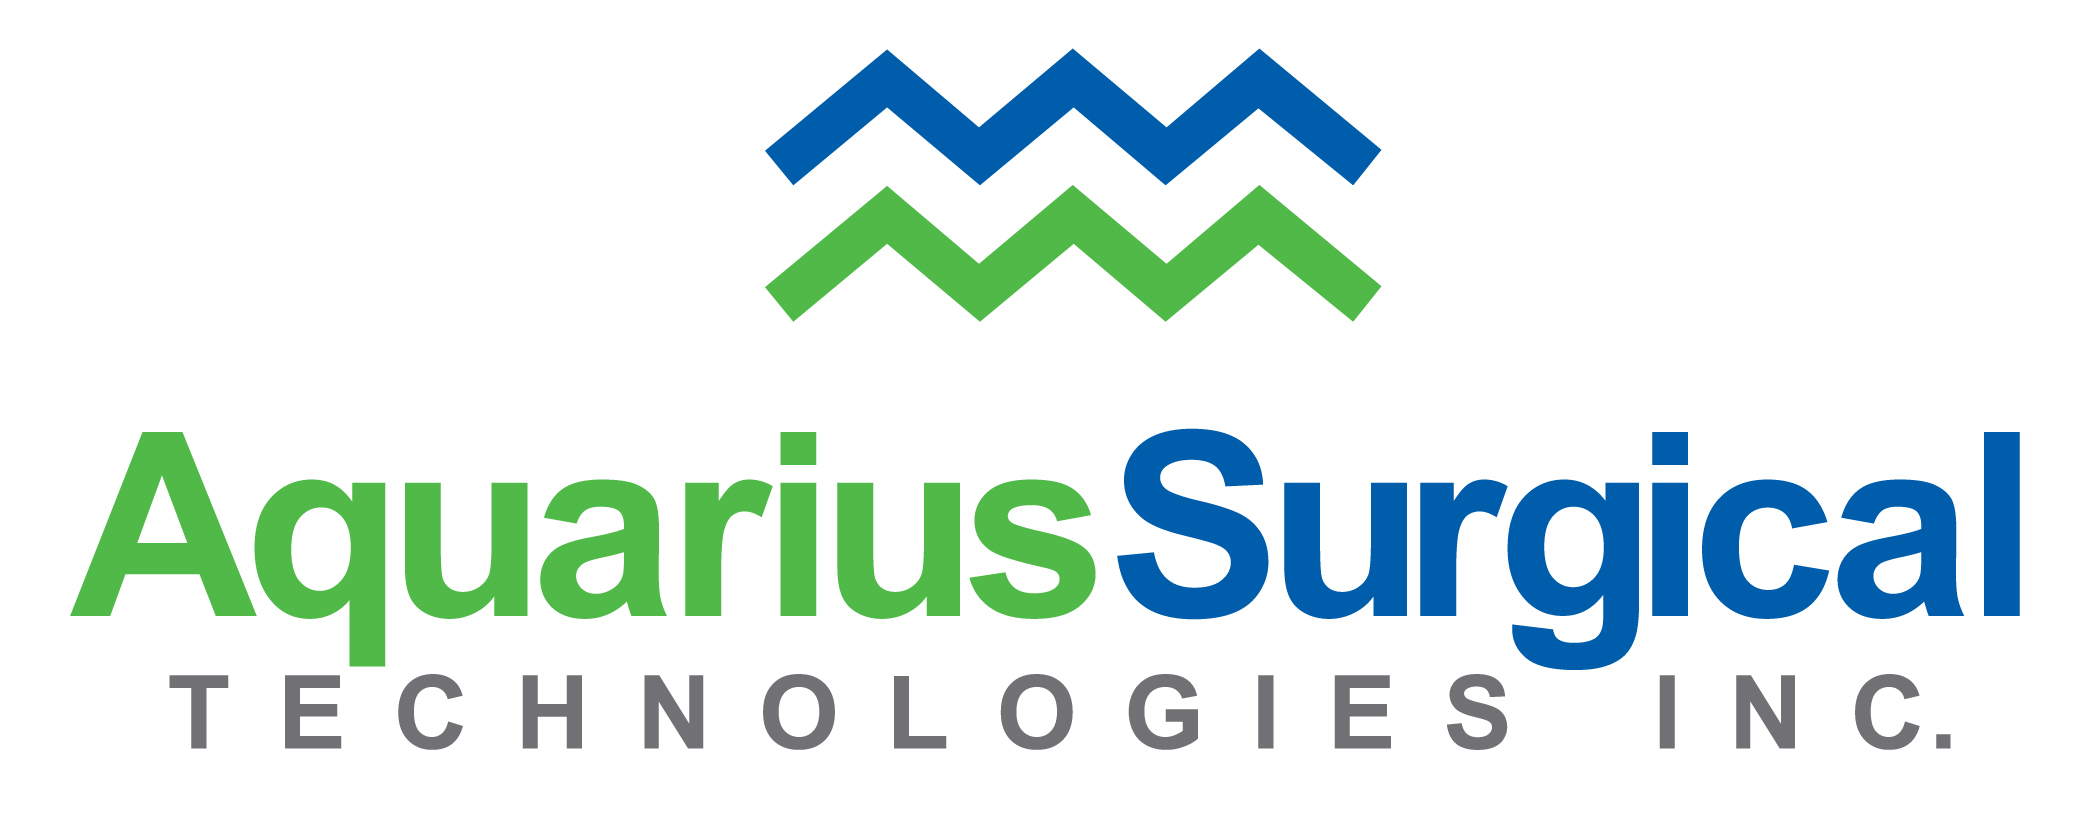 Aquarius Surgical Technologies Announces Share Issuance